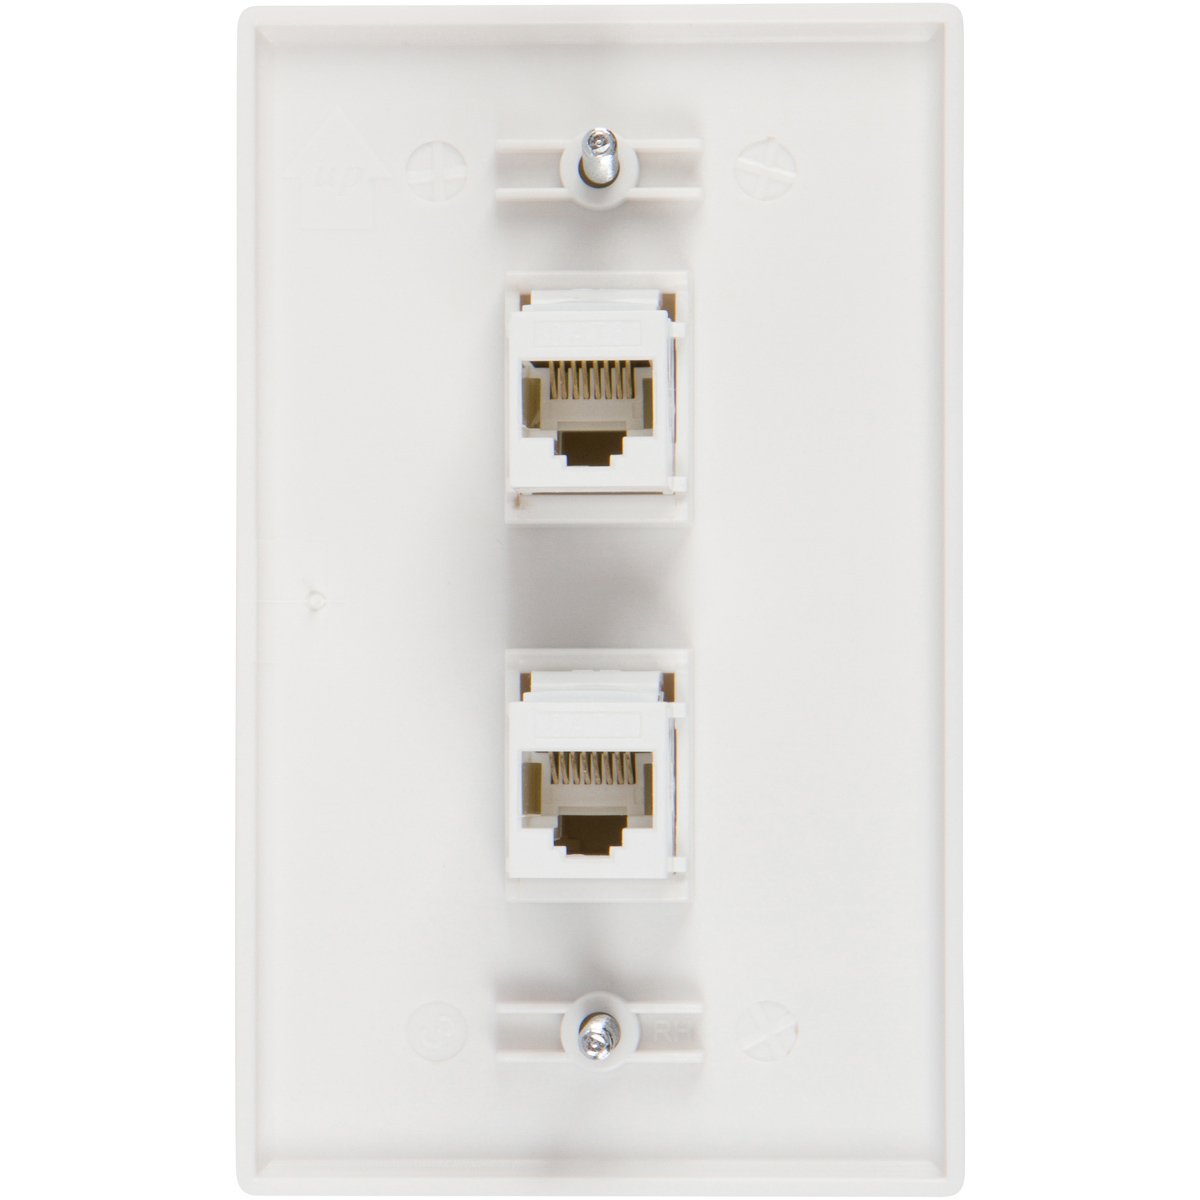 Cable Length CAT6 ShineBear 2 Ports CAT5e CAT6 Modules RJ45 Jack Network Wall Plate with Female to Female Connector C26 